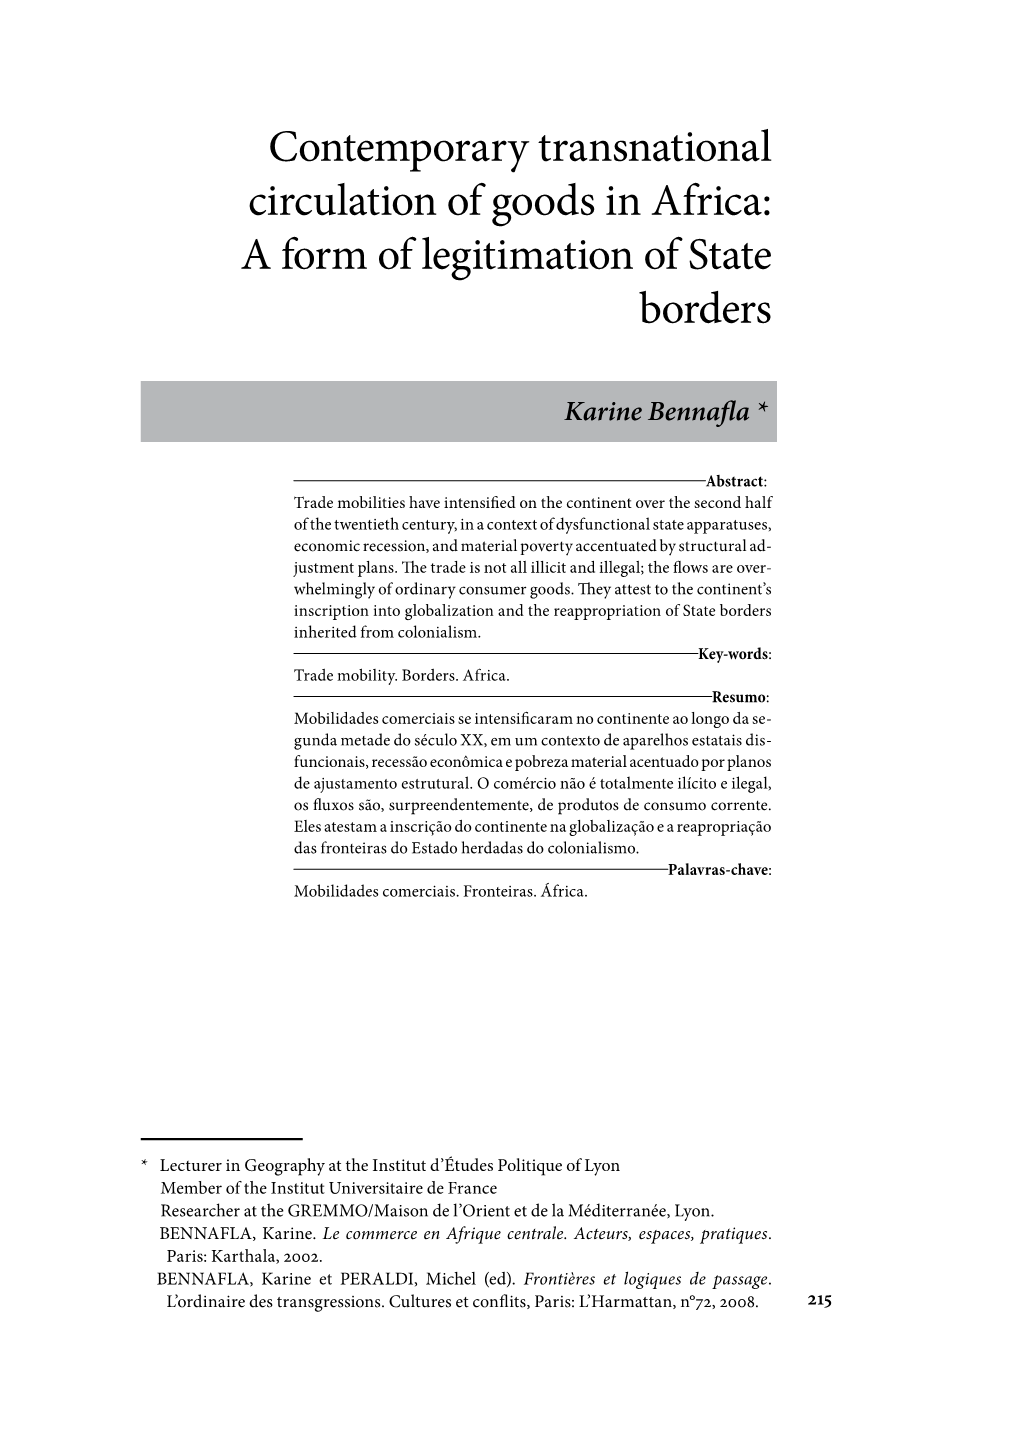 A Form of Legitimation of State Borders